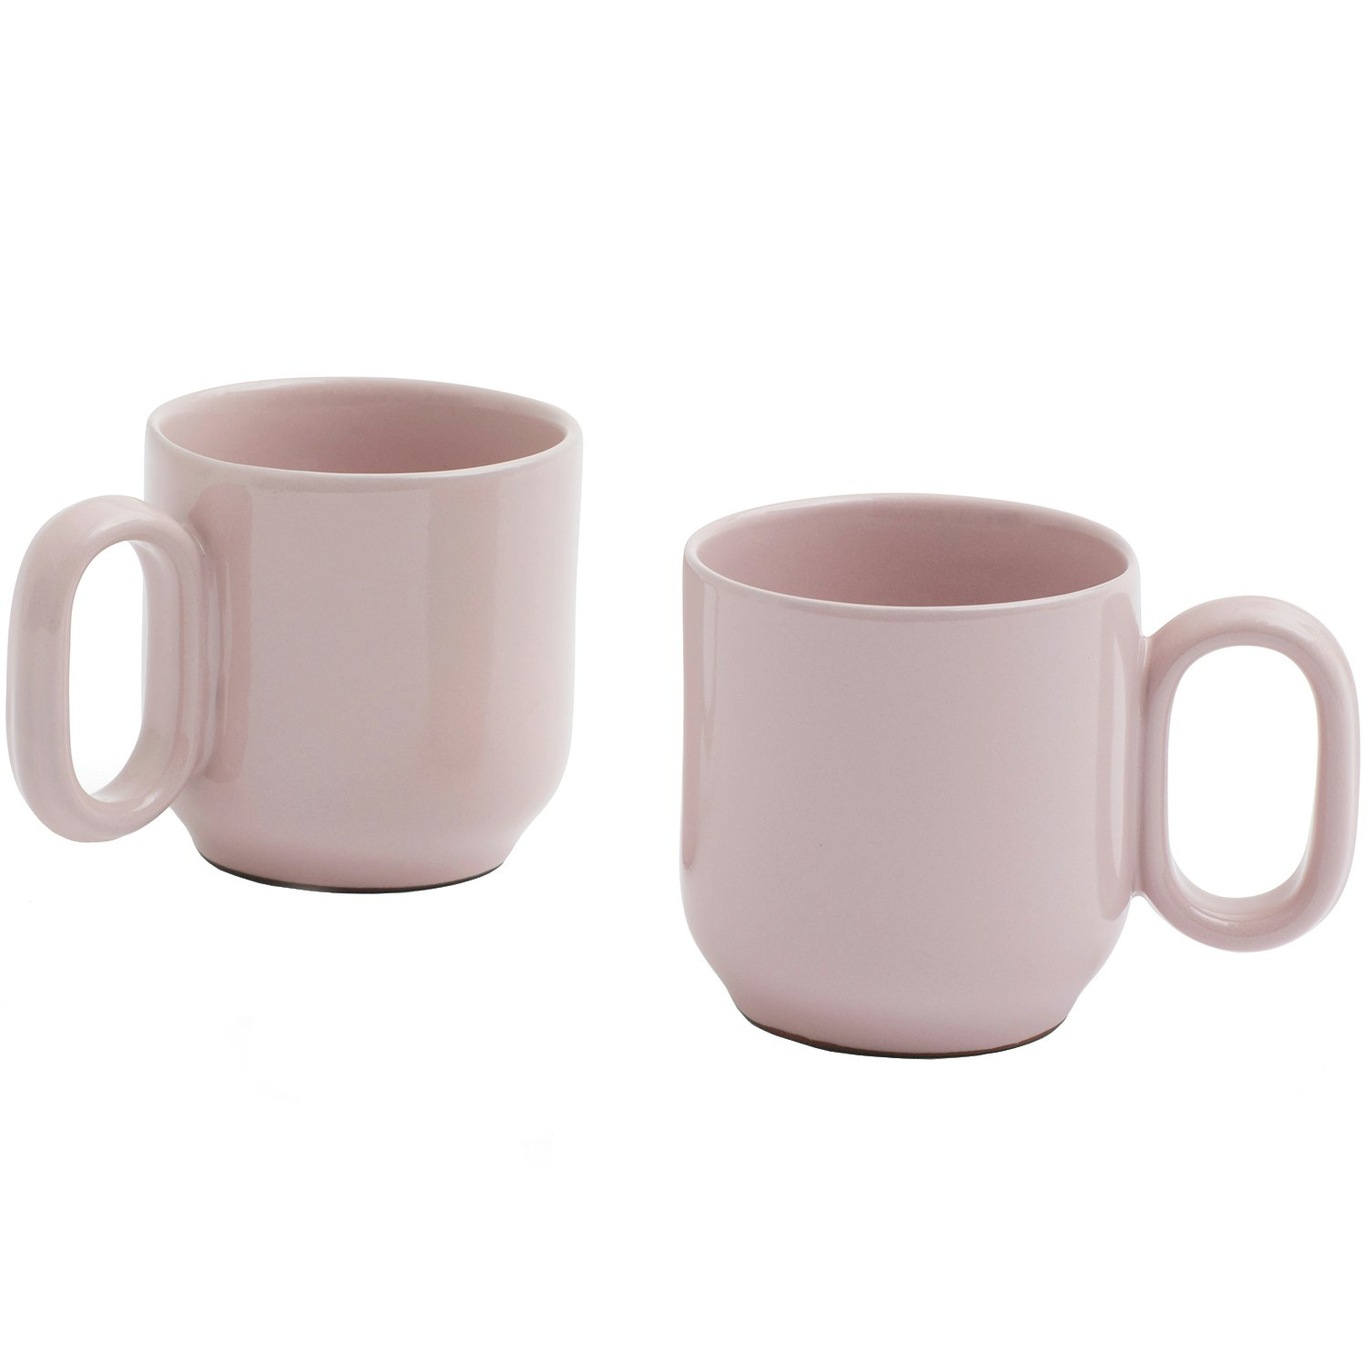 Barro Cups 2-pack, Pink